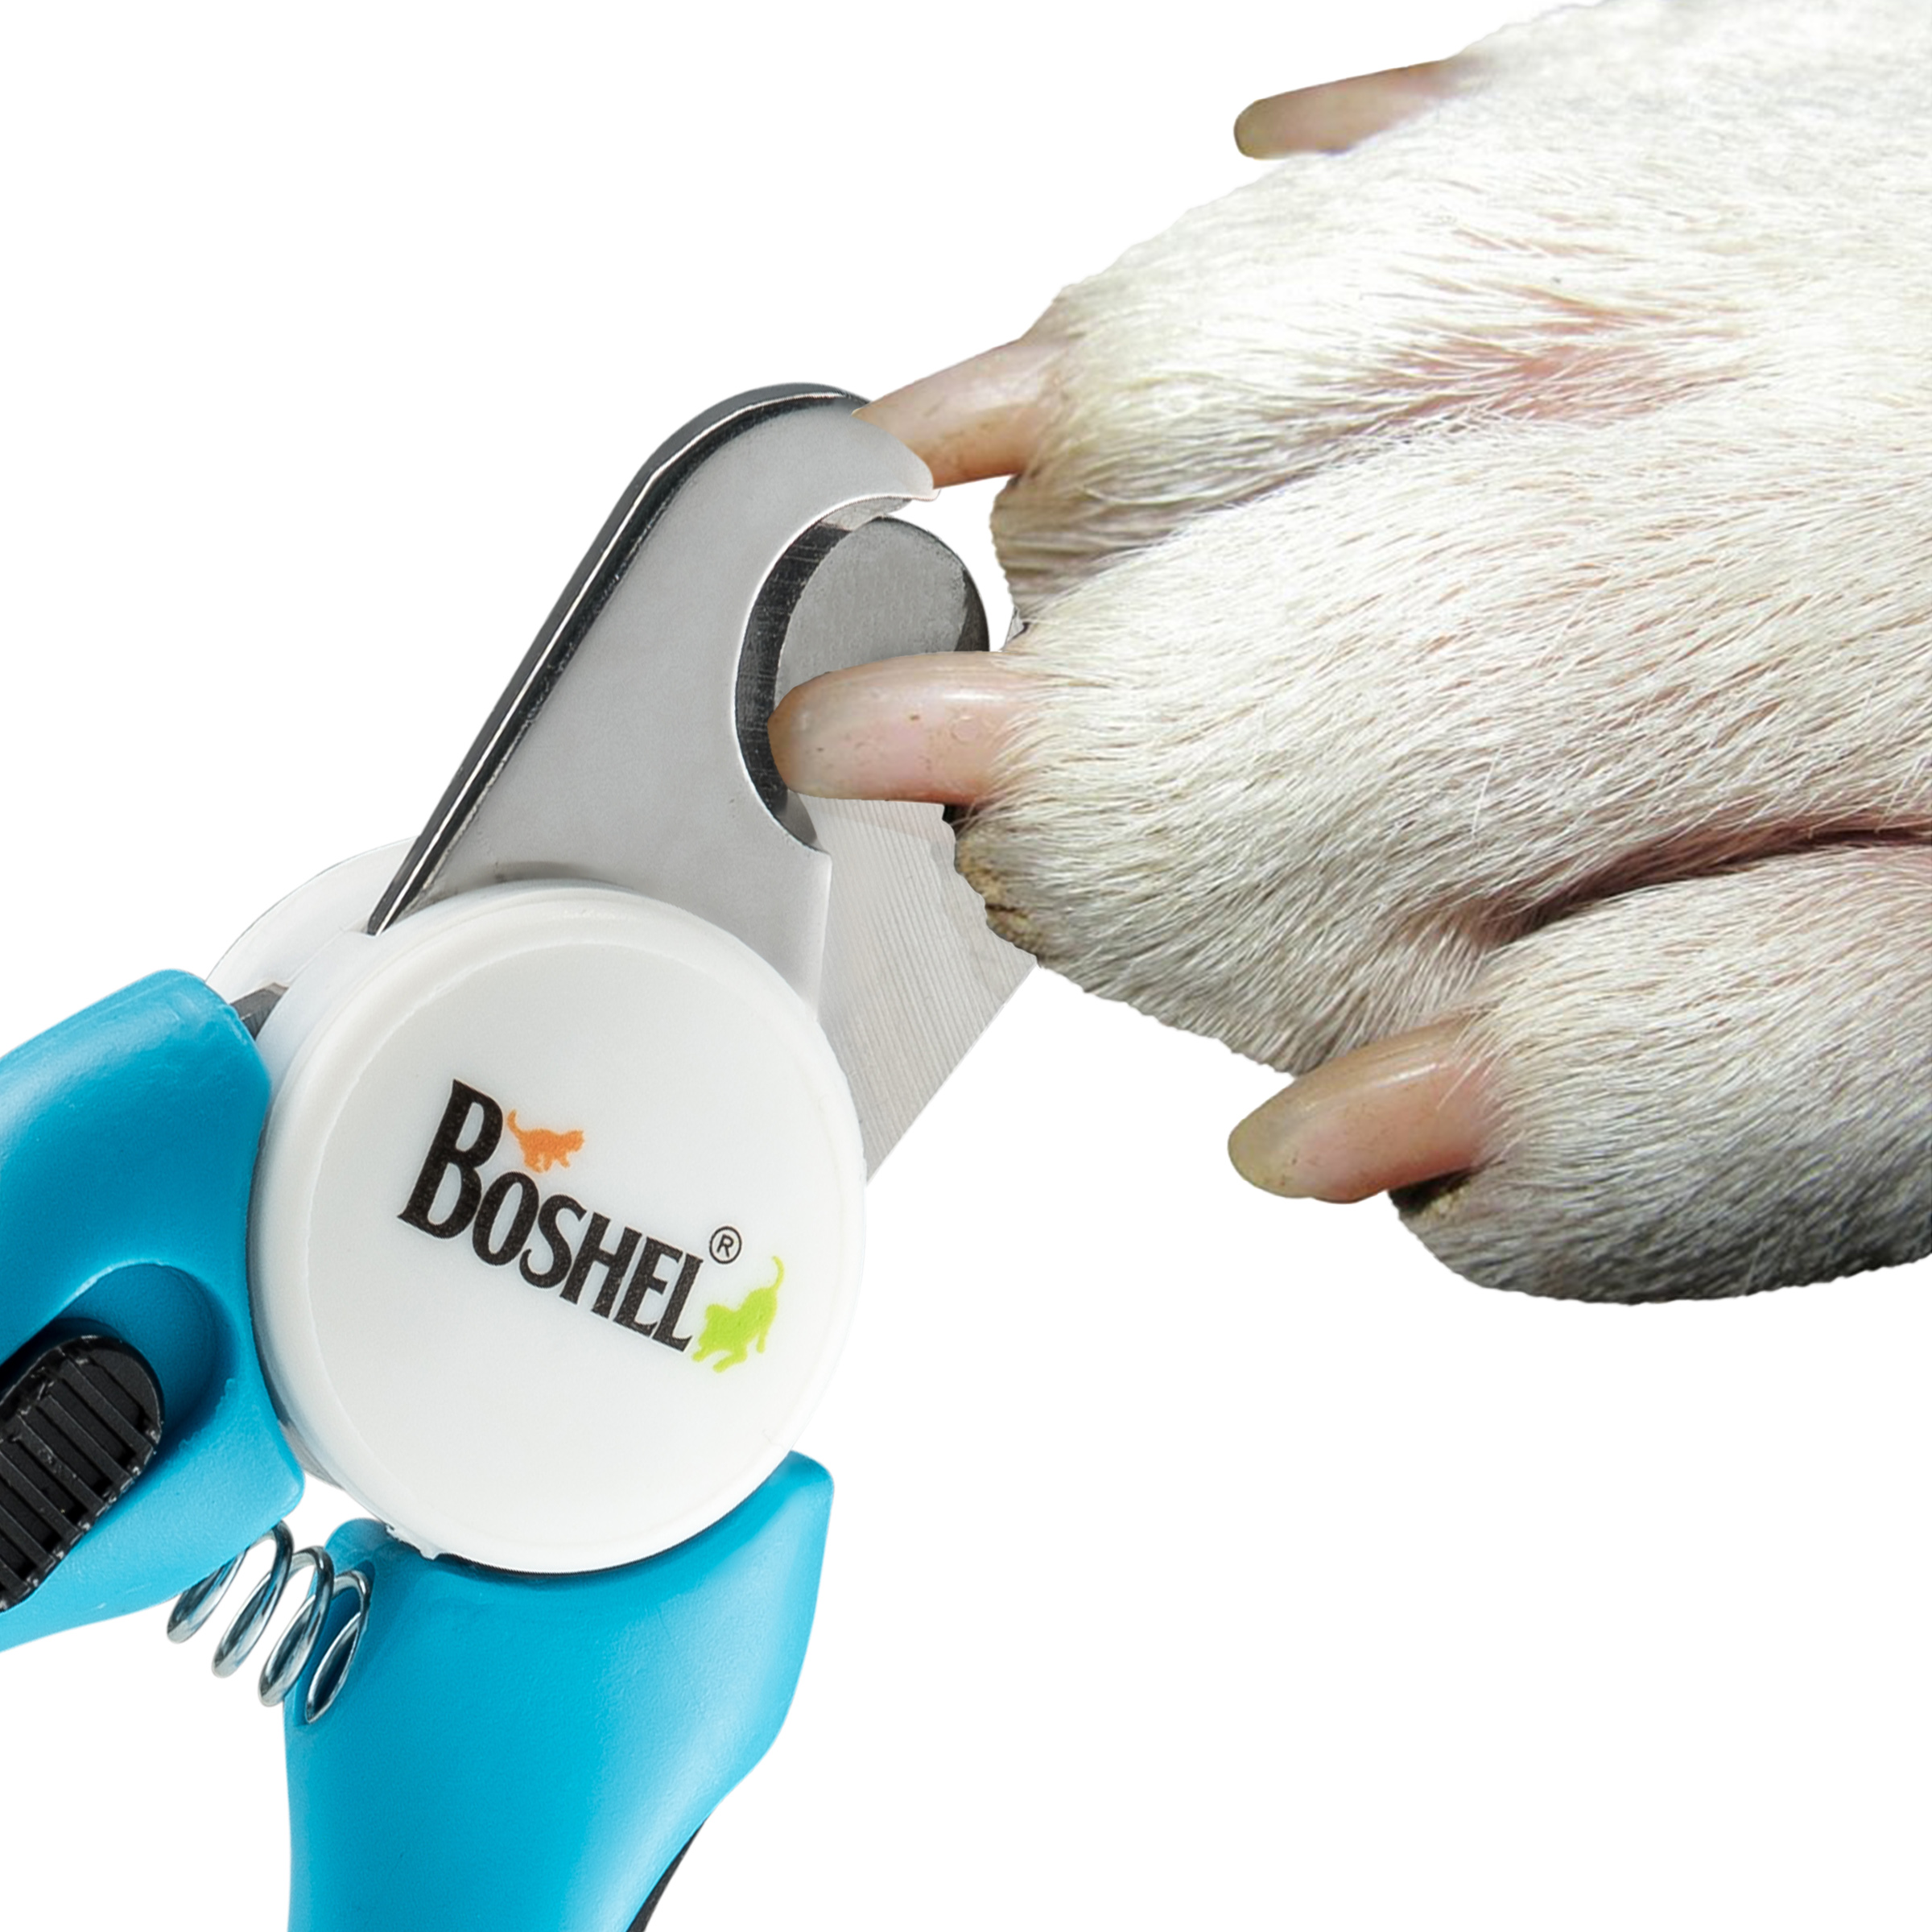 BOSHEL Dog Nail Clippers and Trimmer with Safety Guard to Avoid over-Cutting Nails & Free Nail File, Blue - image 2 of 9